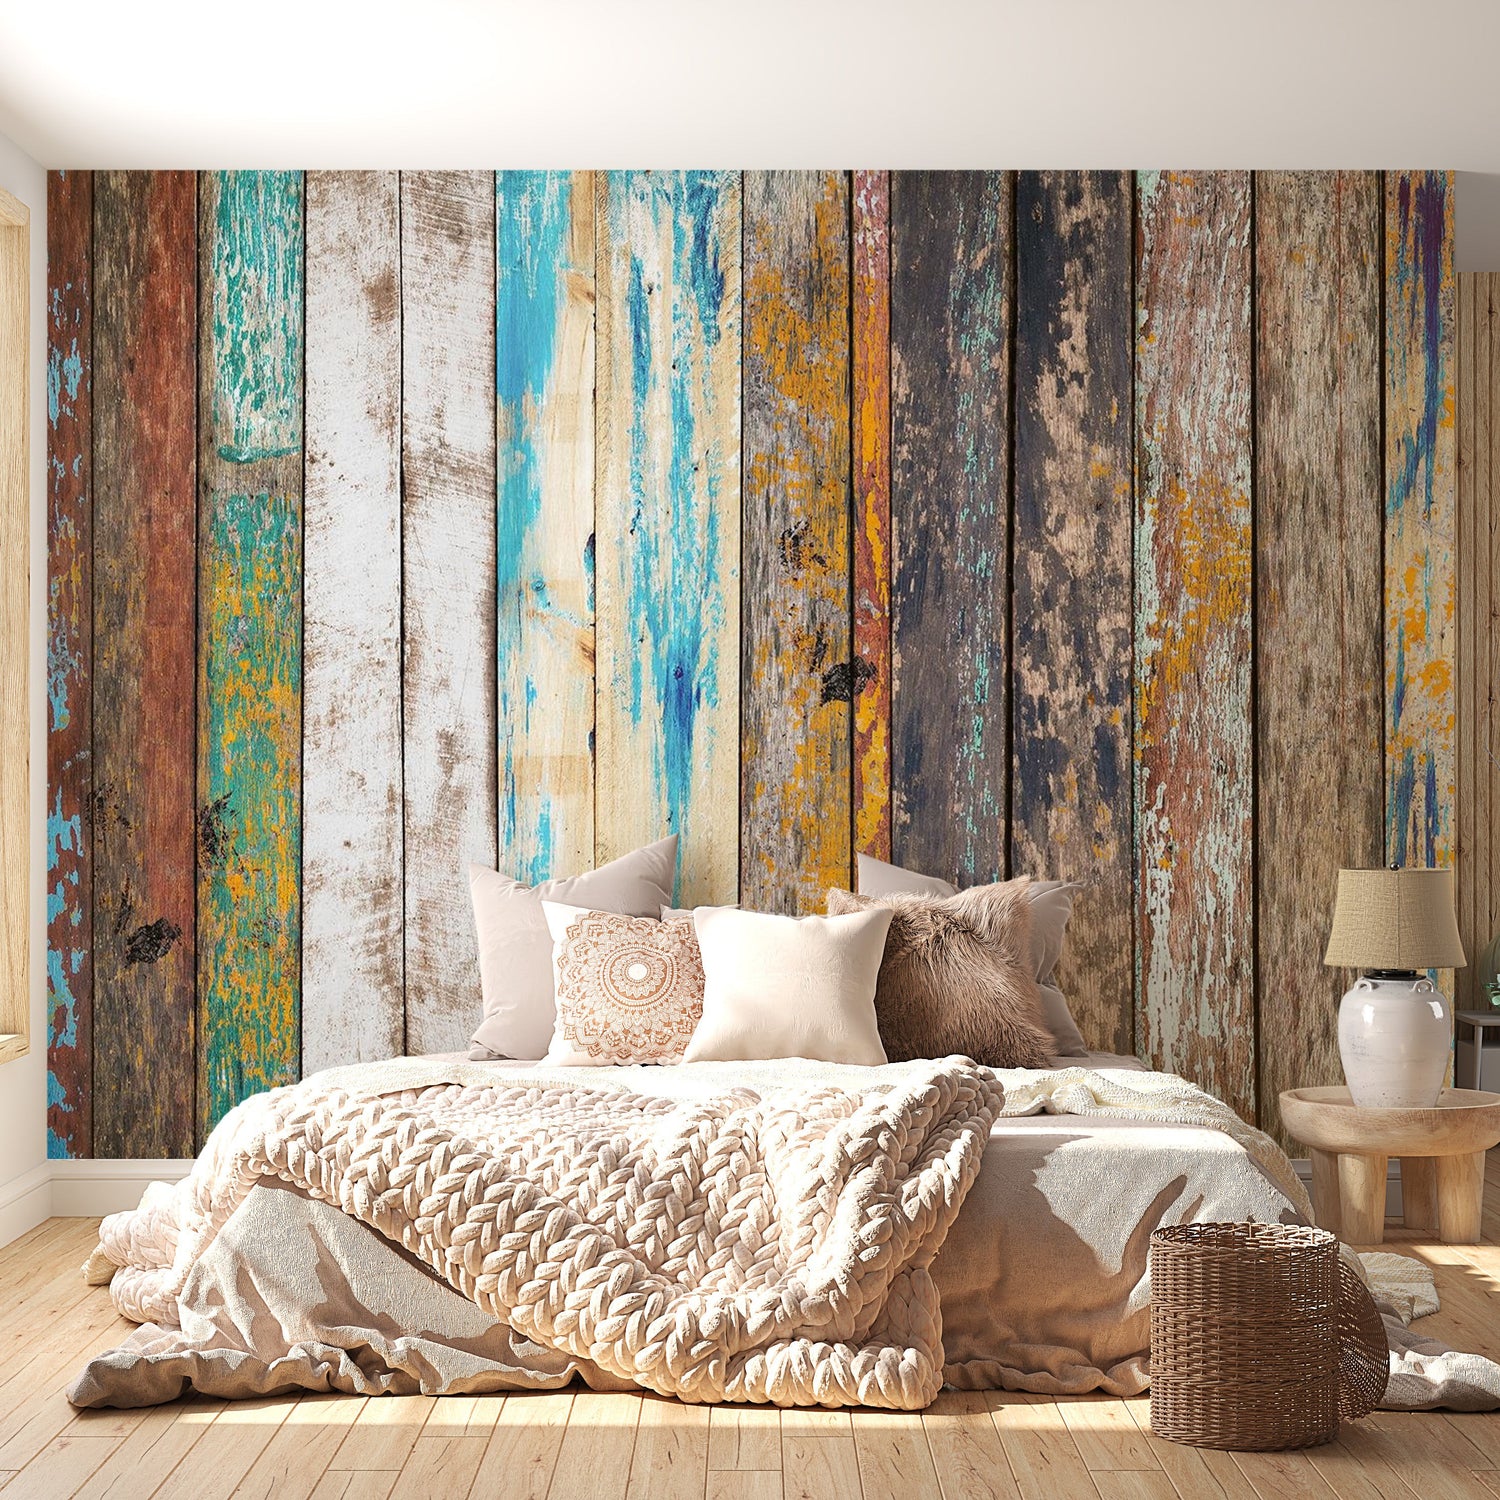 Peel & Stick Wall Mural - Mixed Distressed Wooden Planks - Removable Wall Decals